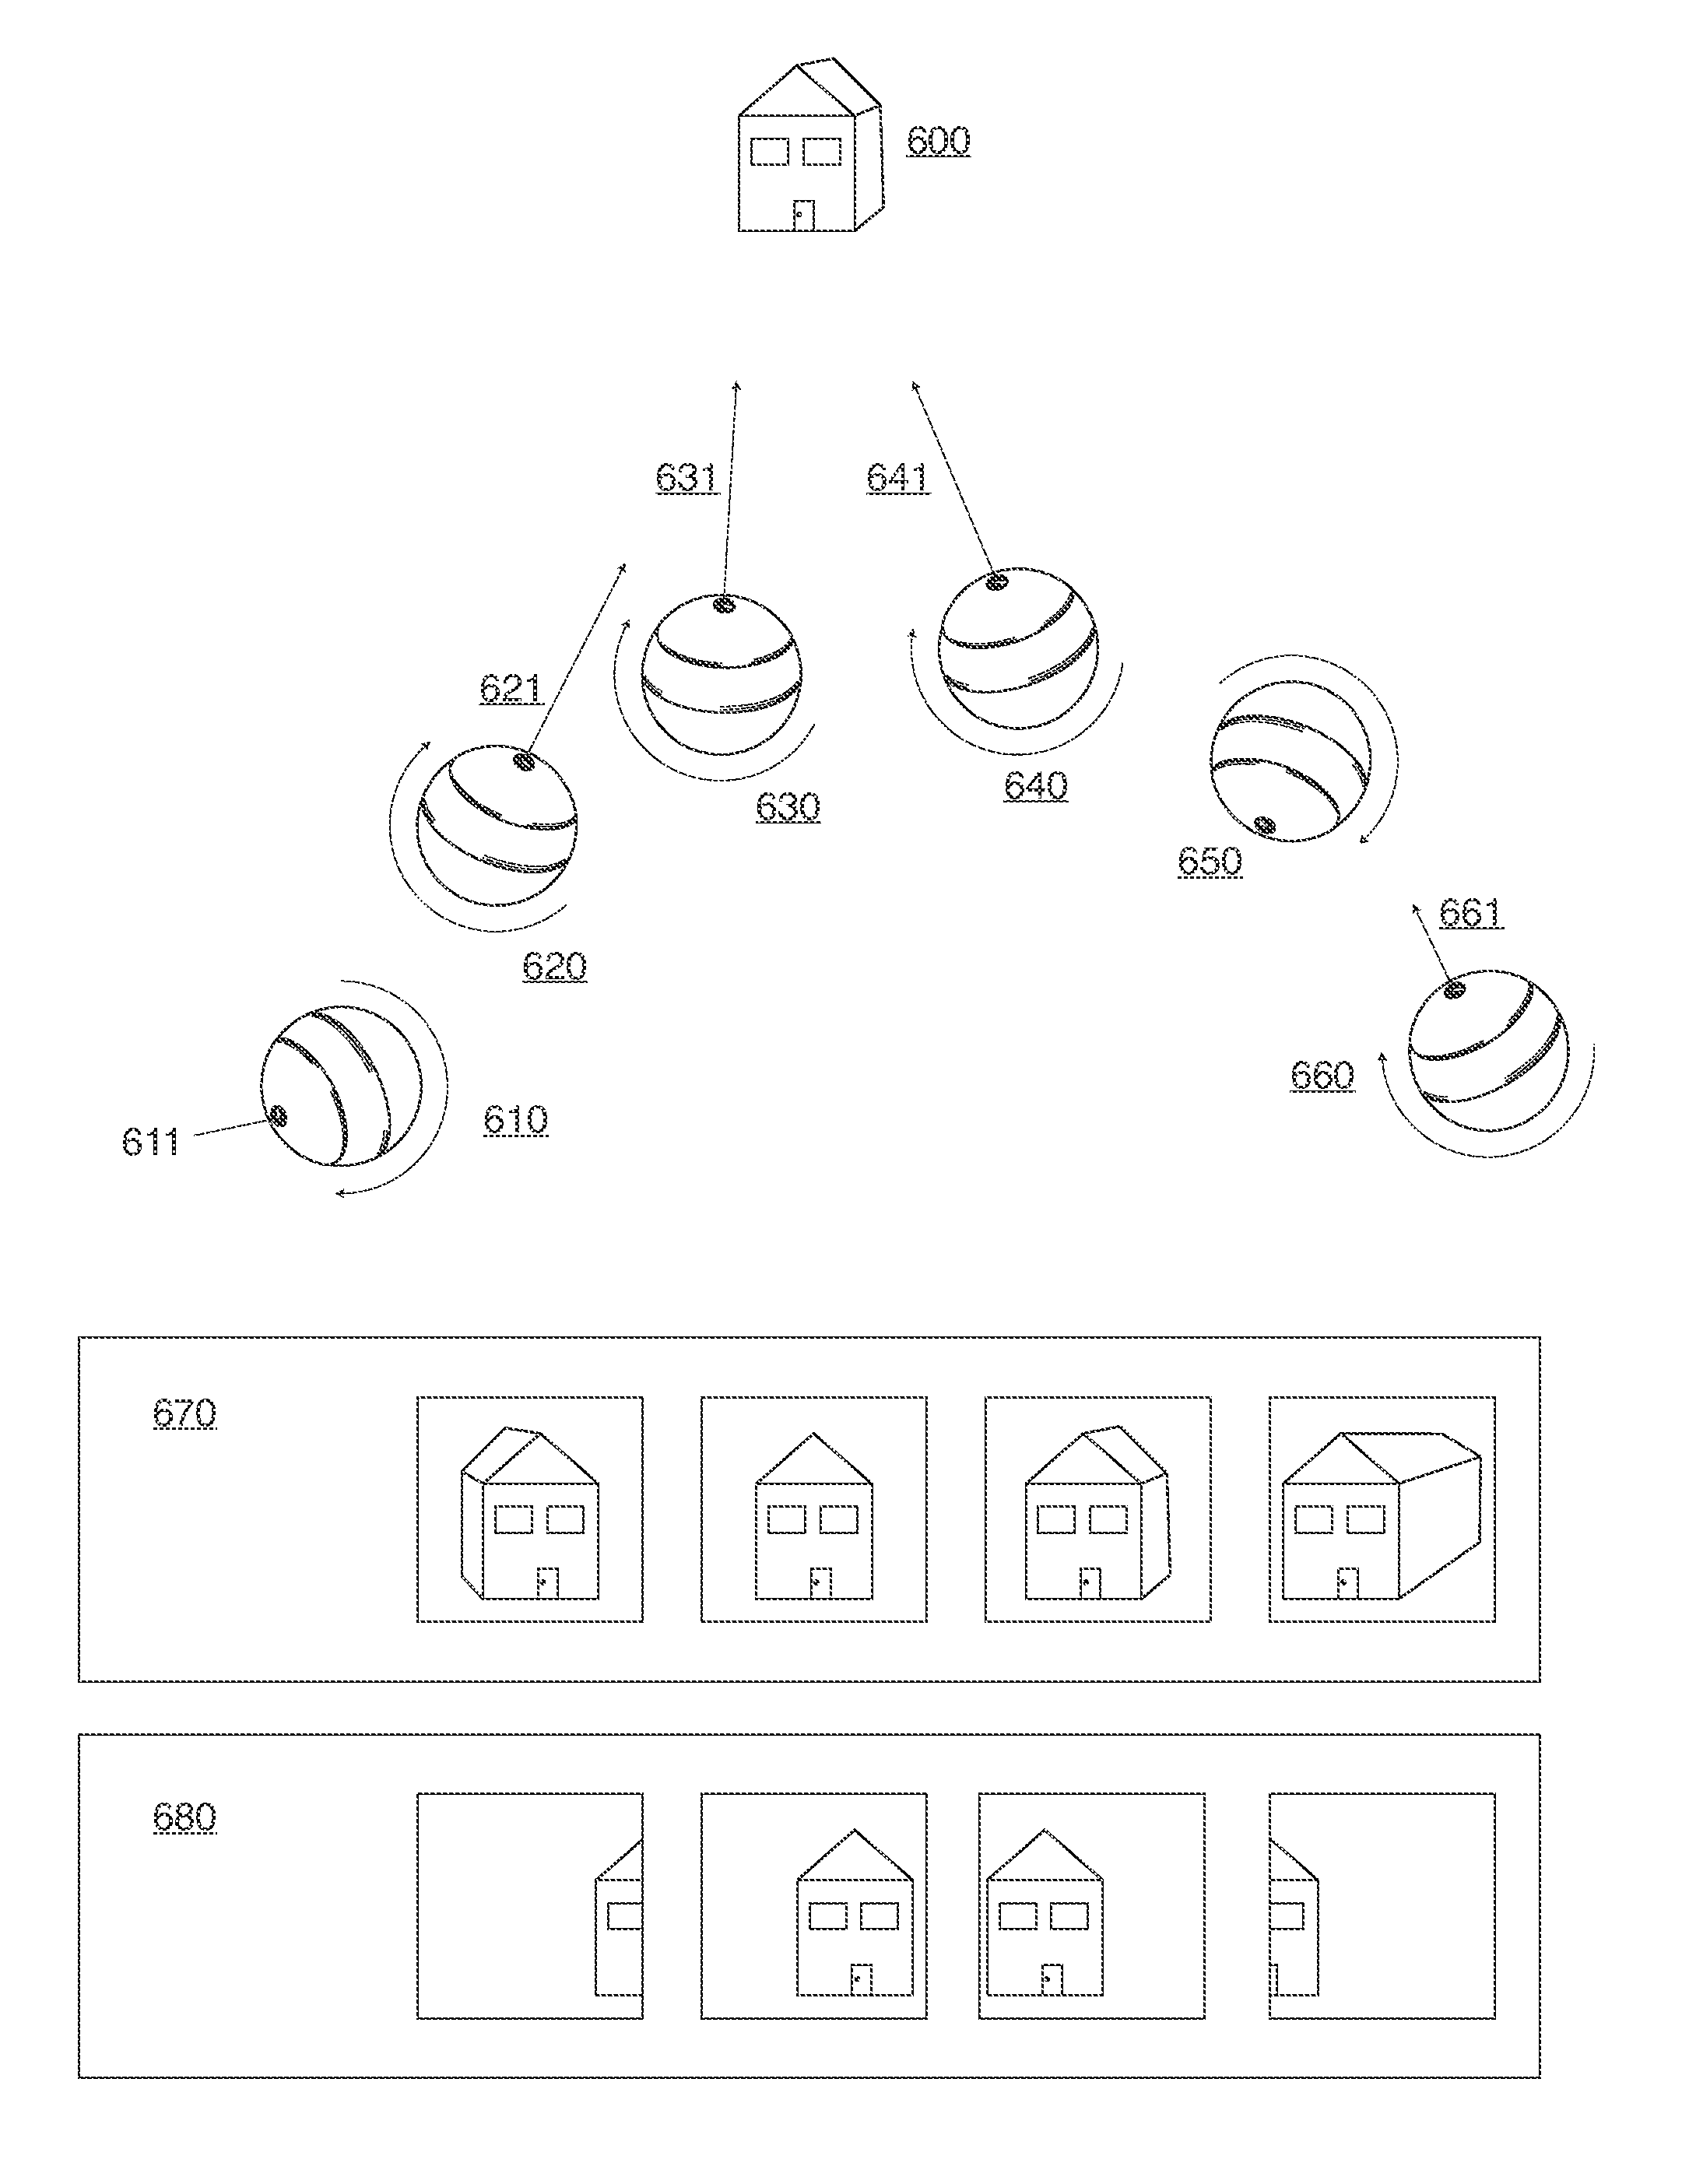 Throwable camera and network for operating the same